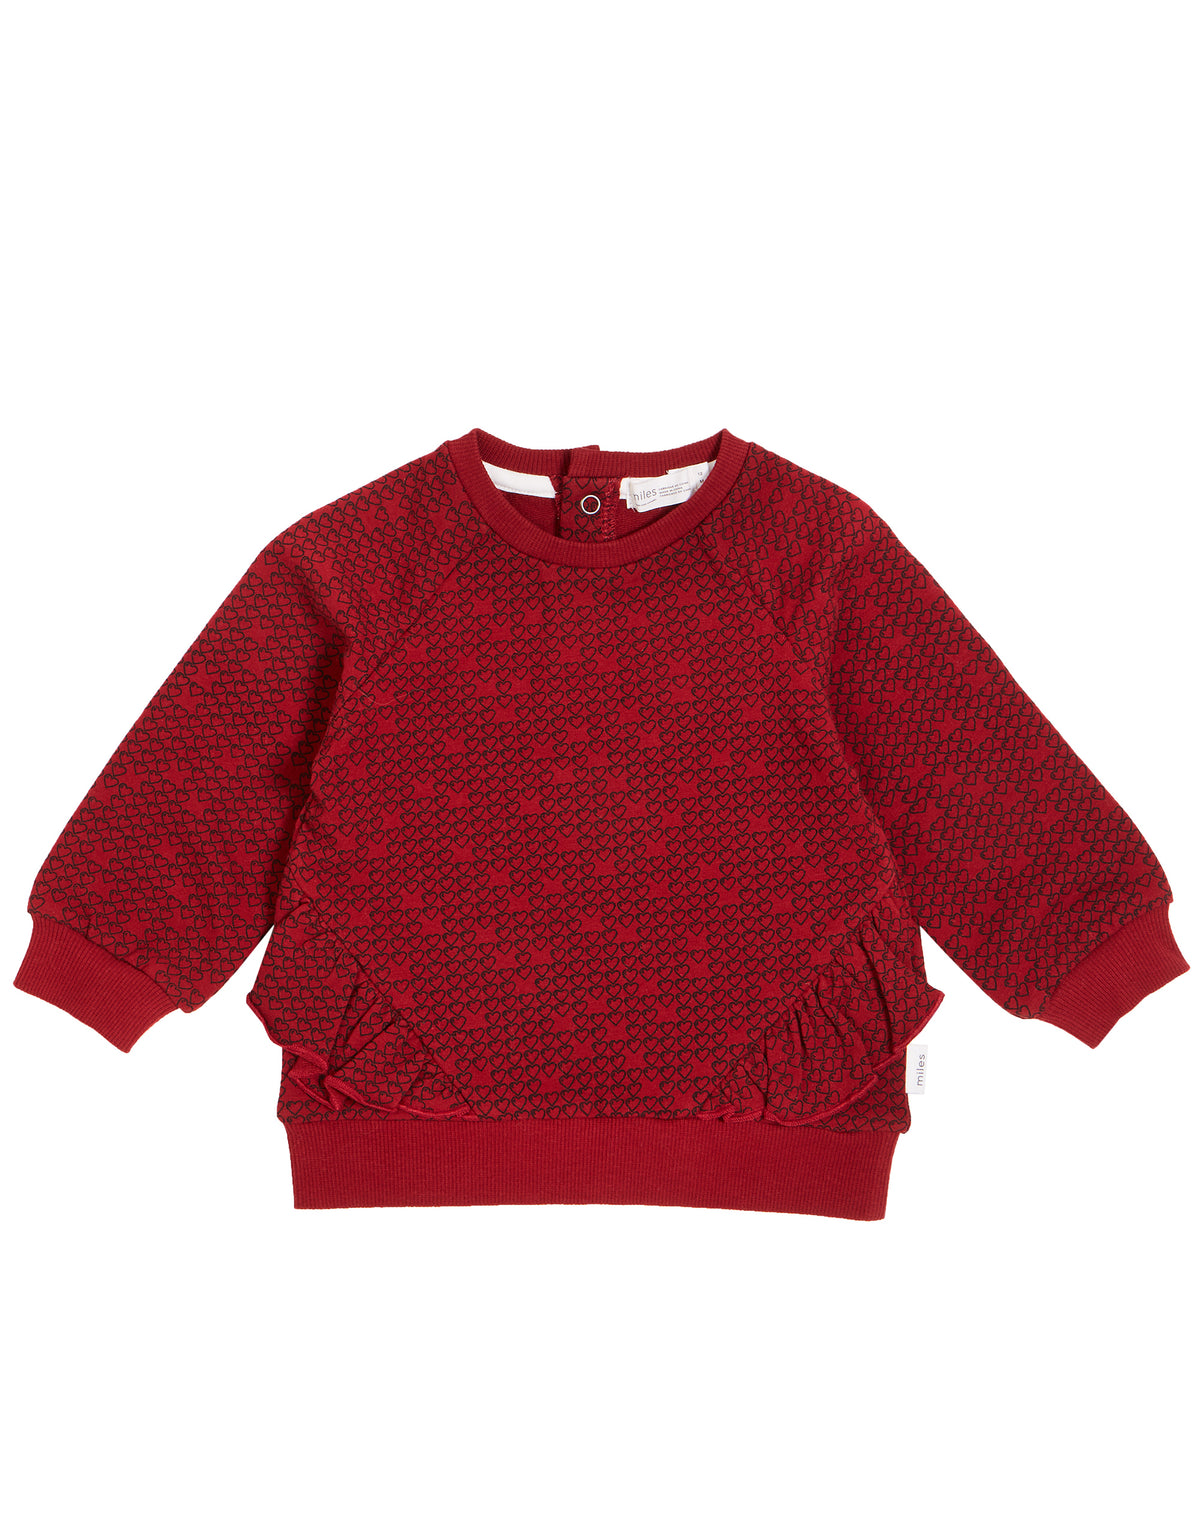 Red Sweatshirt with Hearts and Ruffles